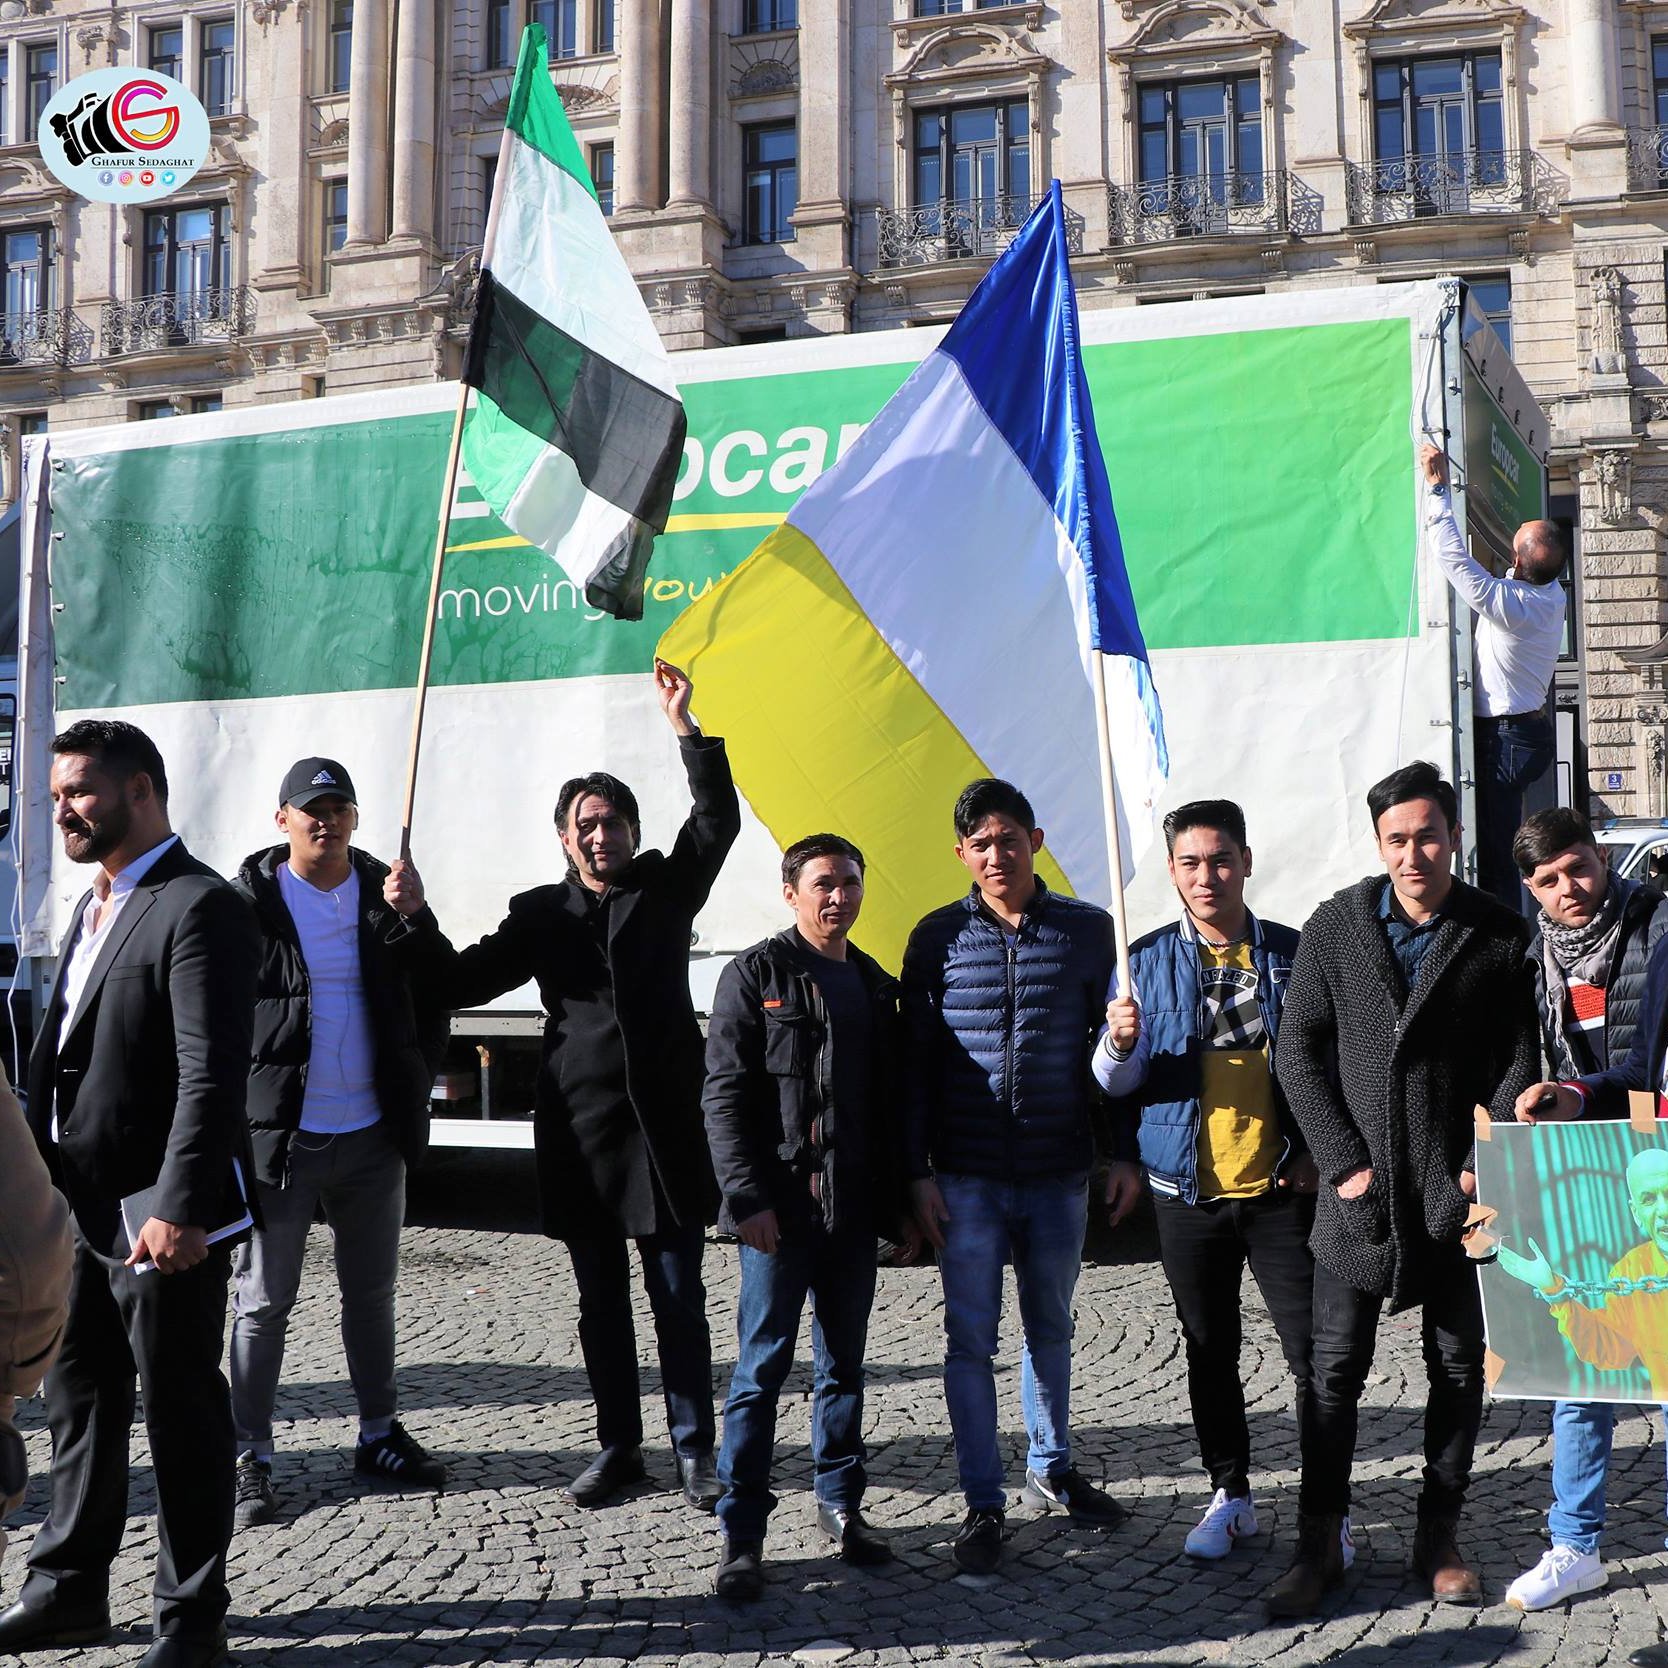 Munich Security Conference: Protest Against Talibanization, Pathanization, One-ethnic State, Ethnic Cleansing and Systematic Discrimination